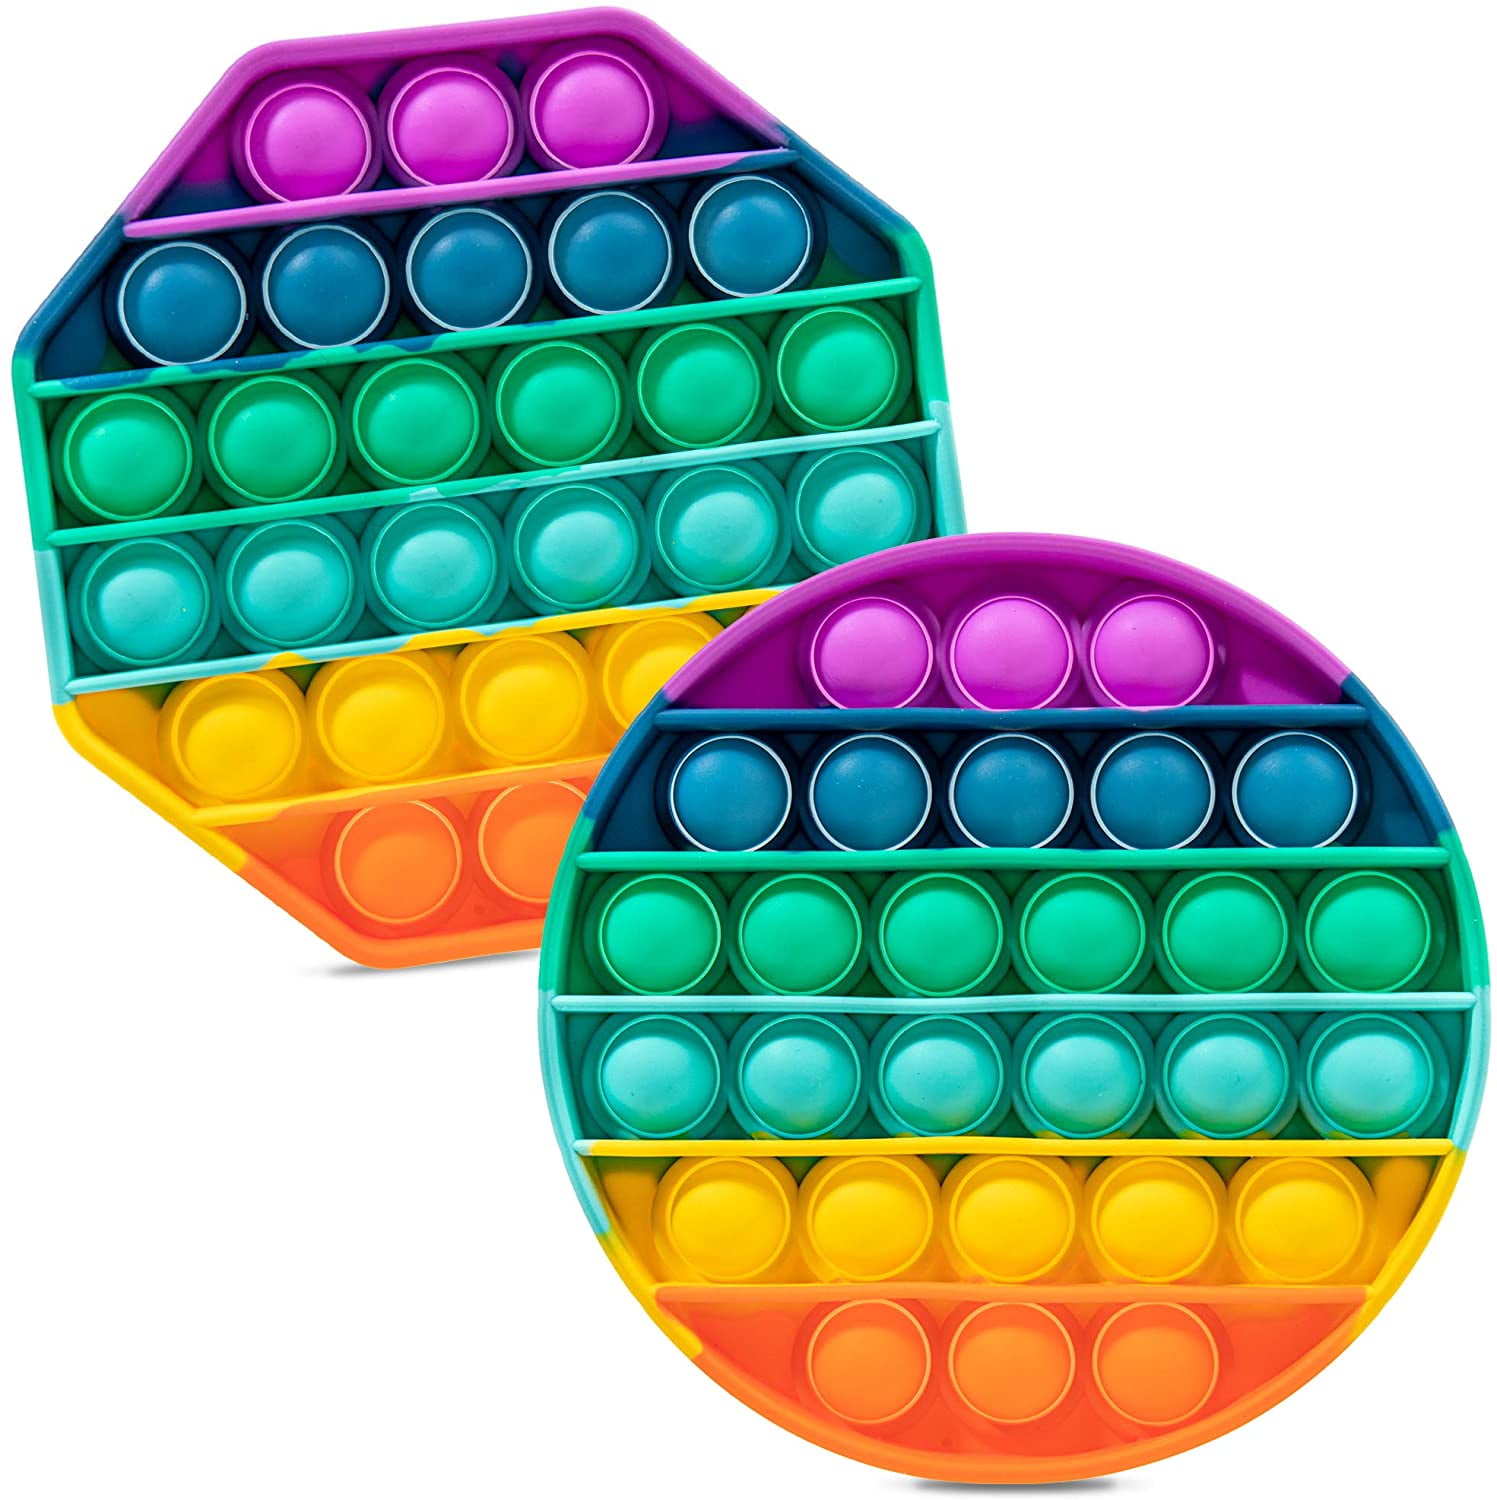 Octagon 4PCS Push Pop Bubble Sensory Fidget Toy,Autism Special Needs Stress Reliever Squeeze Sensory Toy Silicone Stress Reliever Toy for Kid and Adults with ADHD or Autism